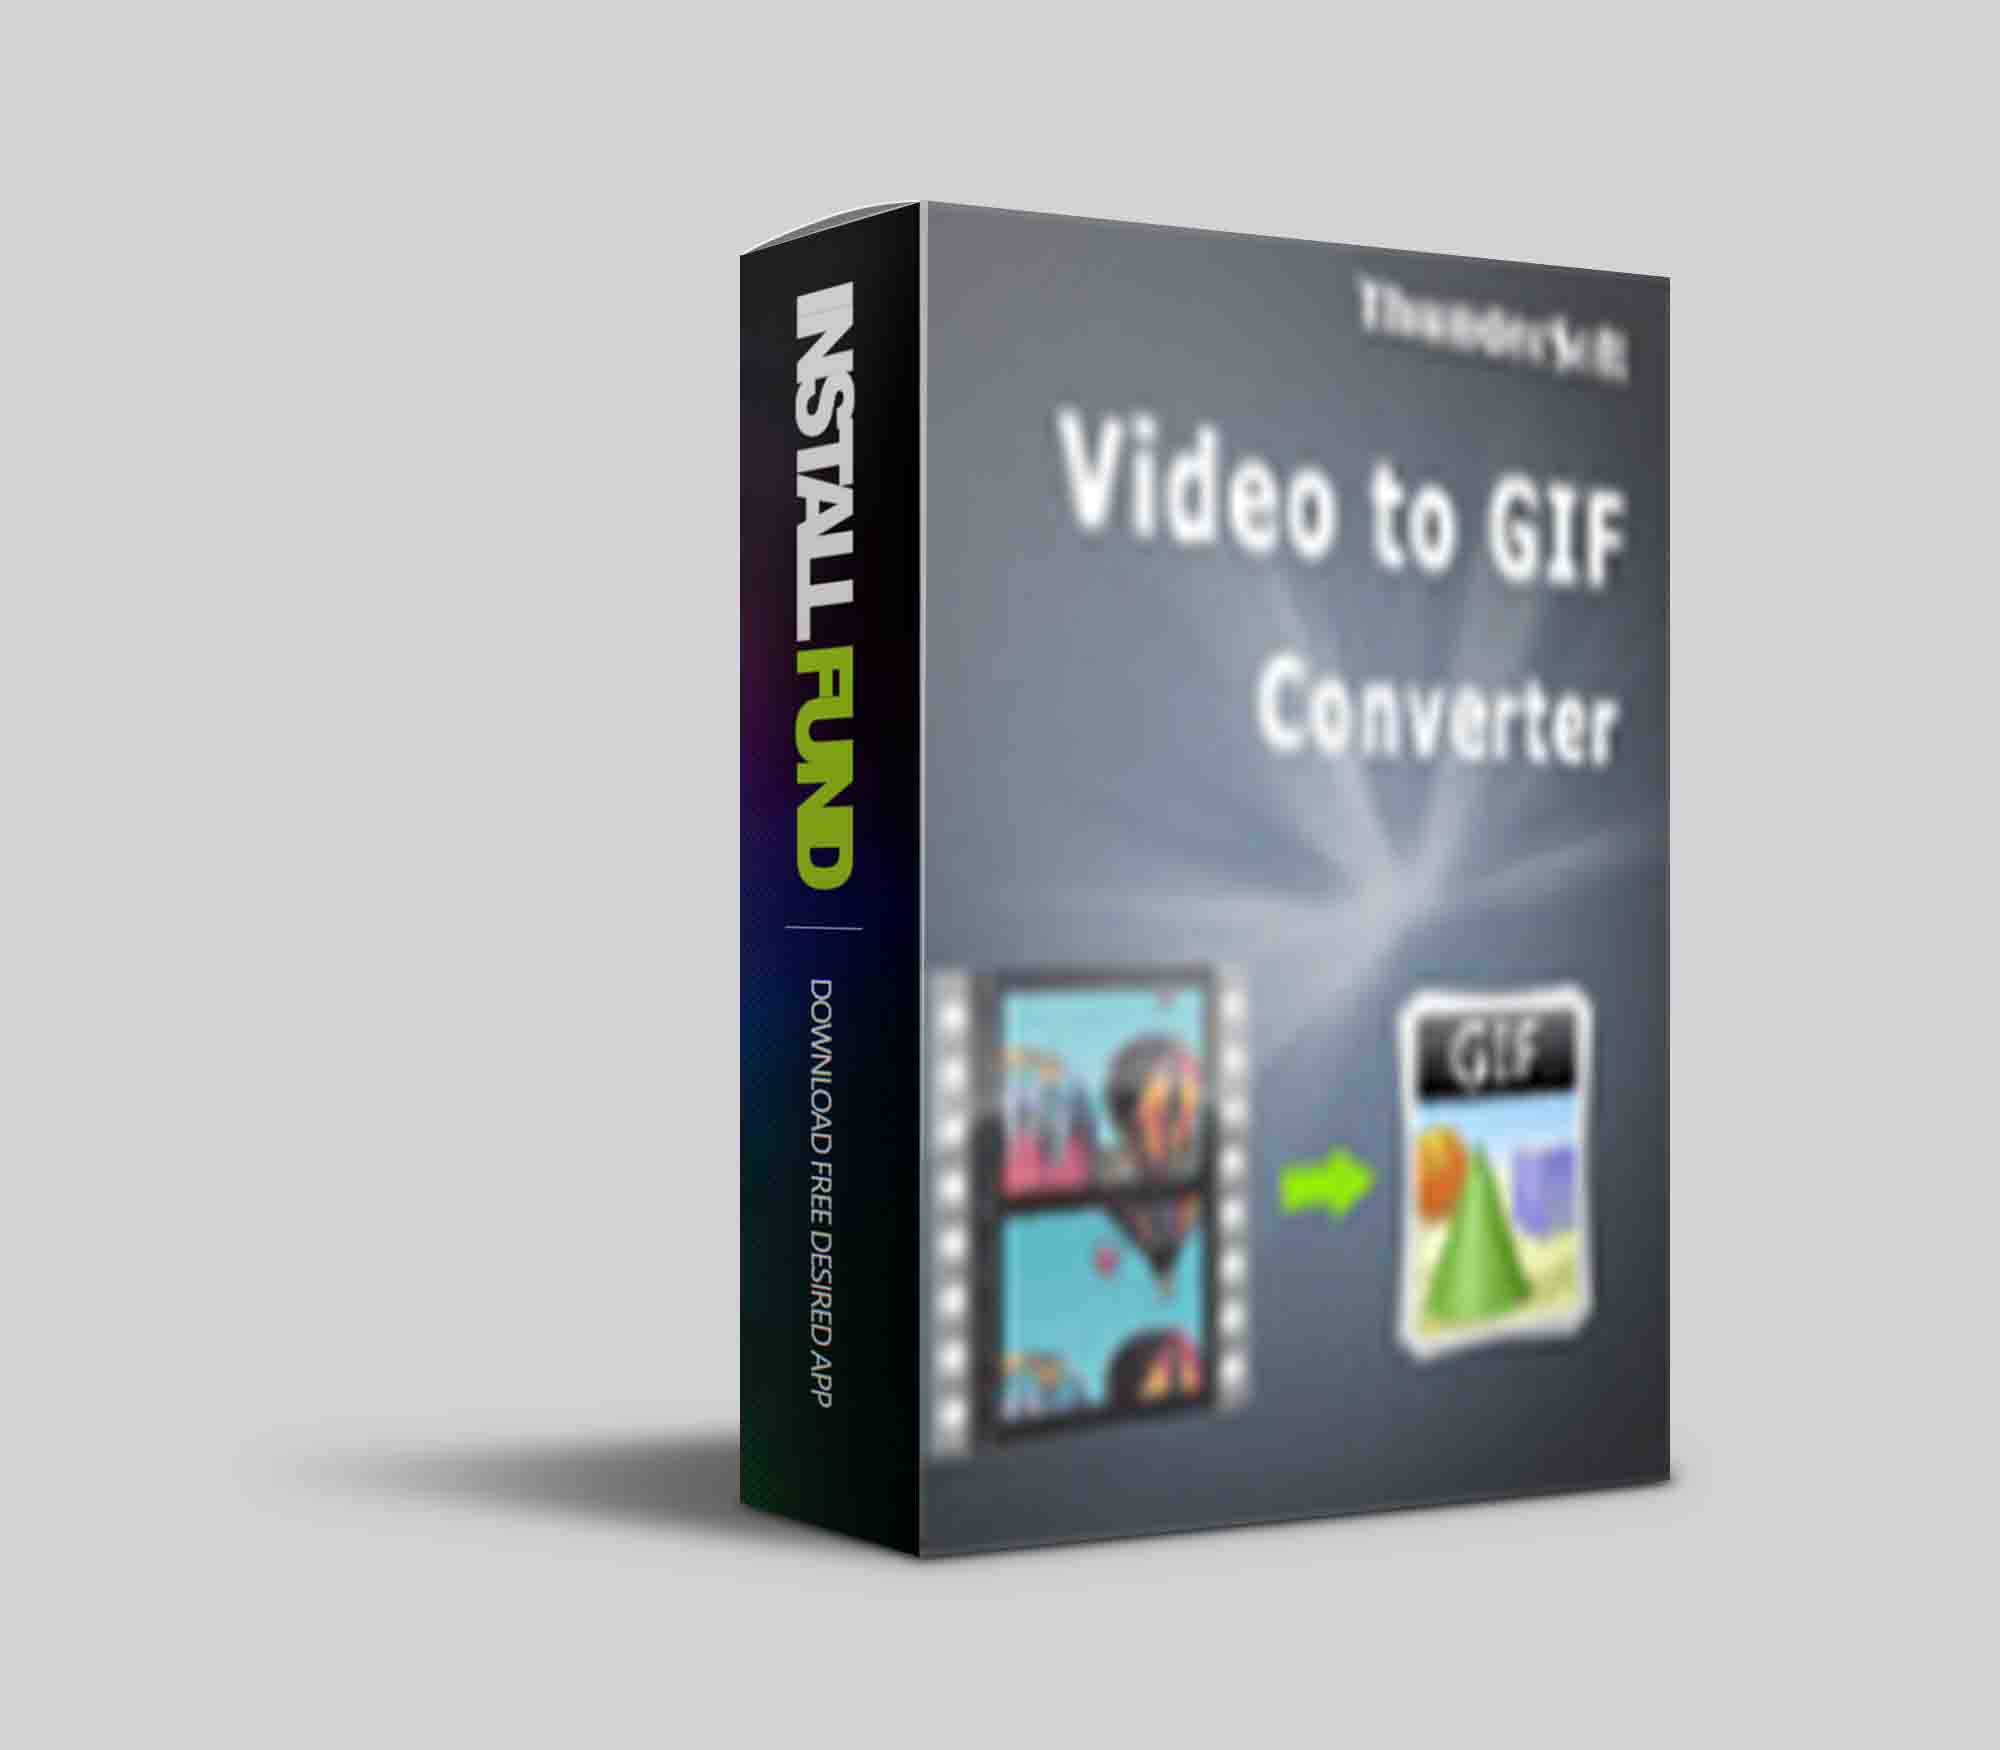 ThunderSoft Flash to Video Converter 5.2.0 free instal